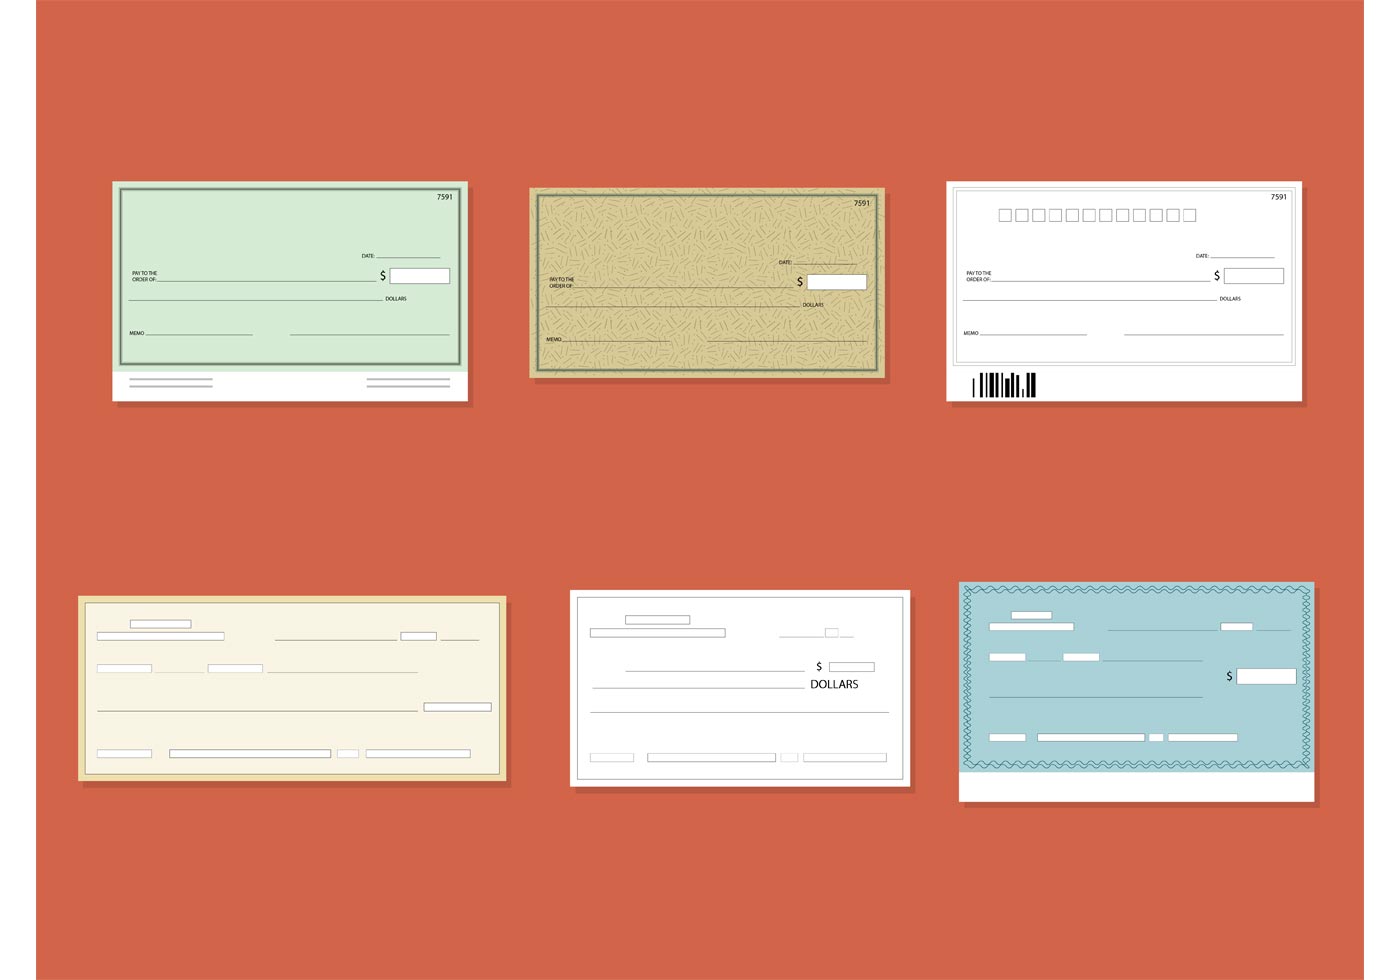 Vector Blank Checks - Download Free Vector Art, Stock Graphics & Images